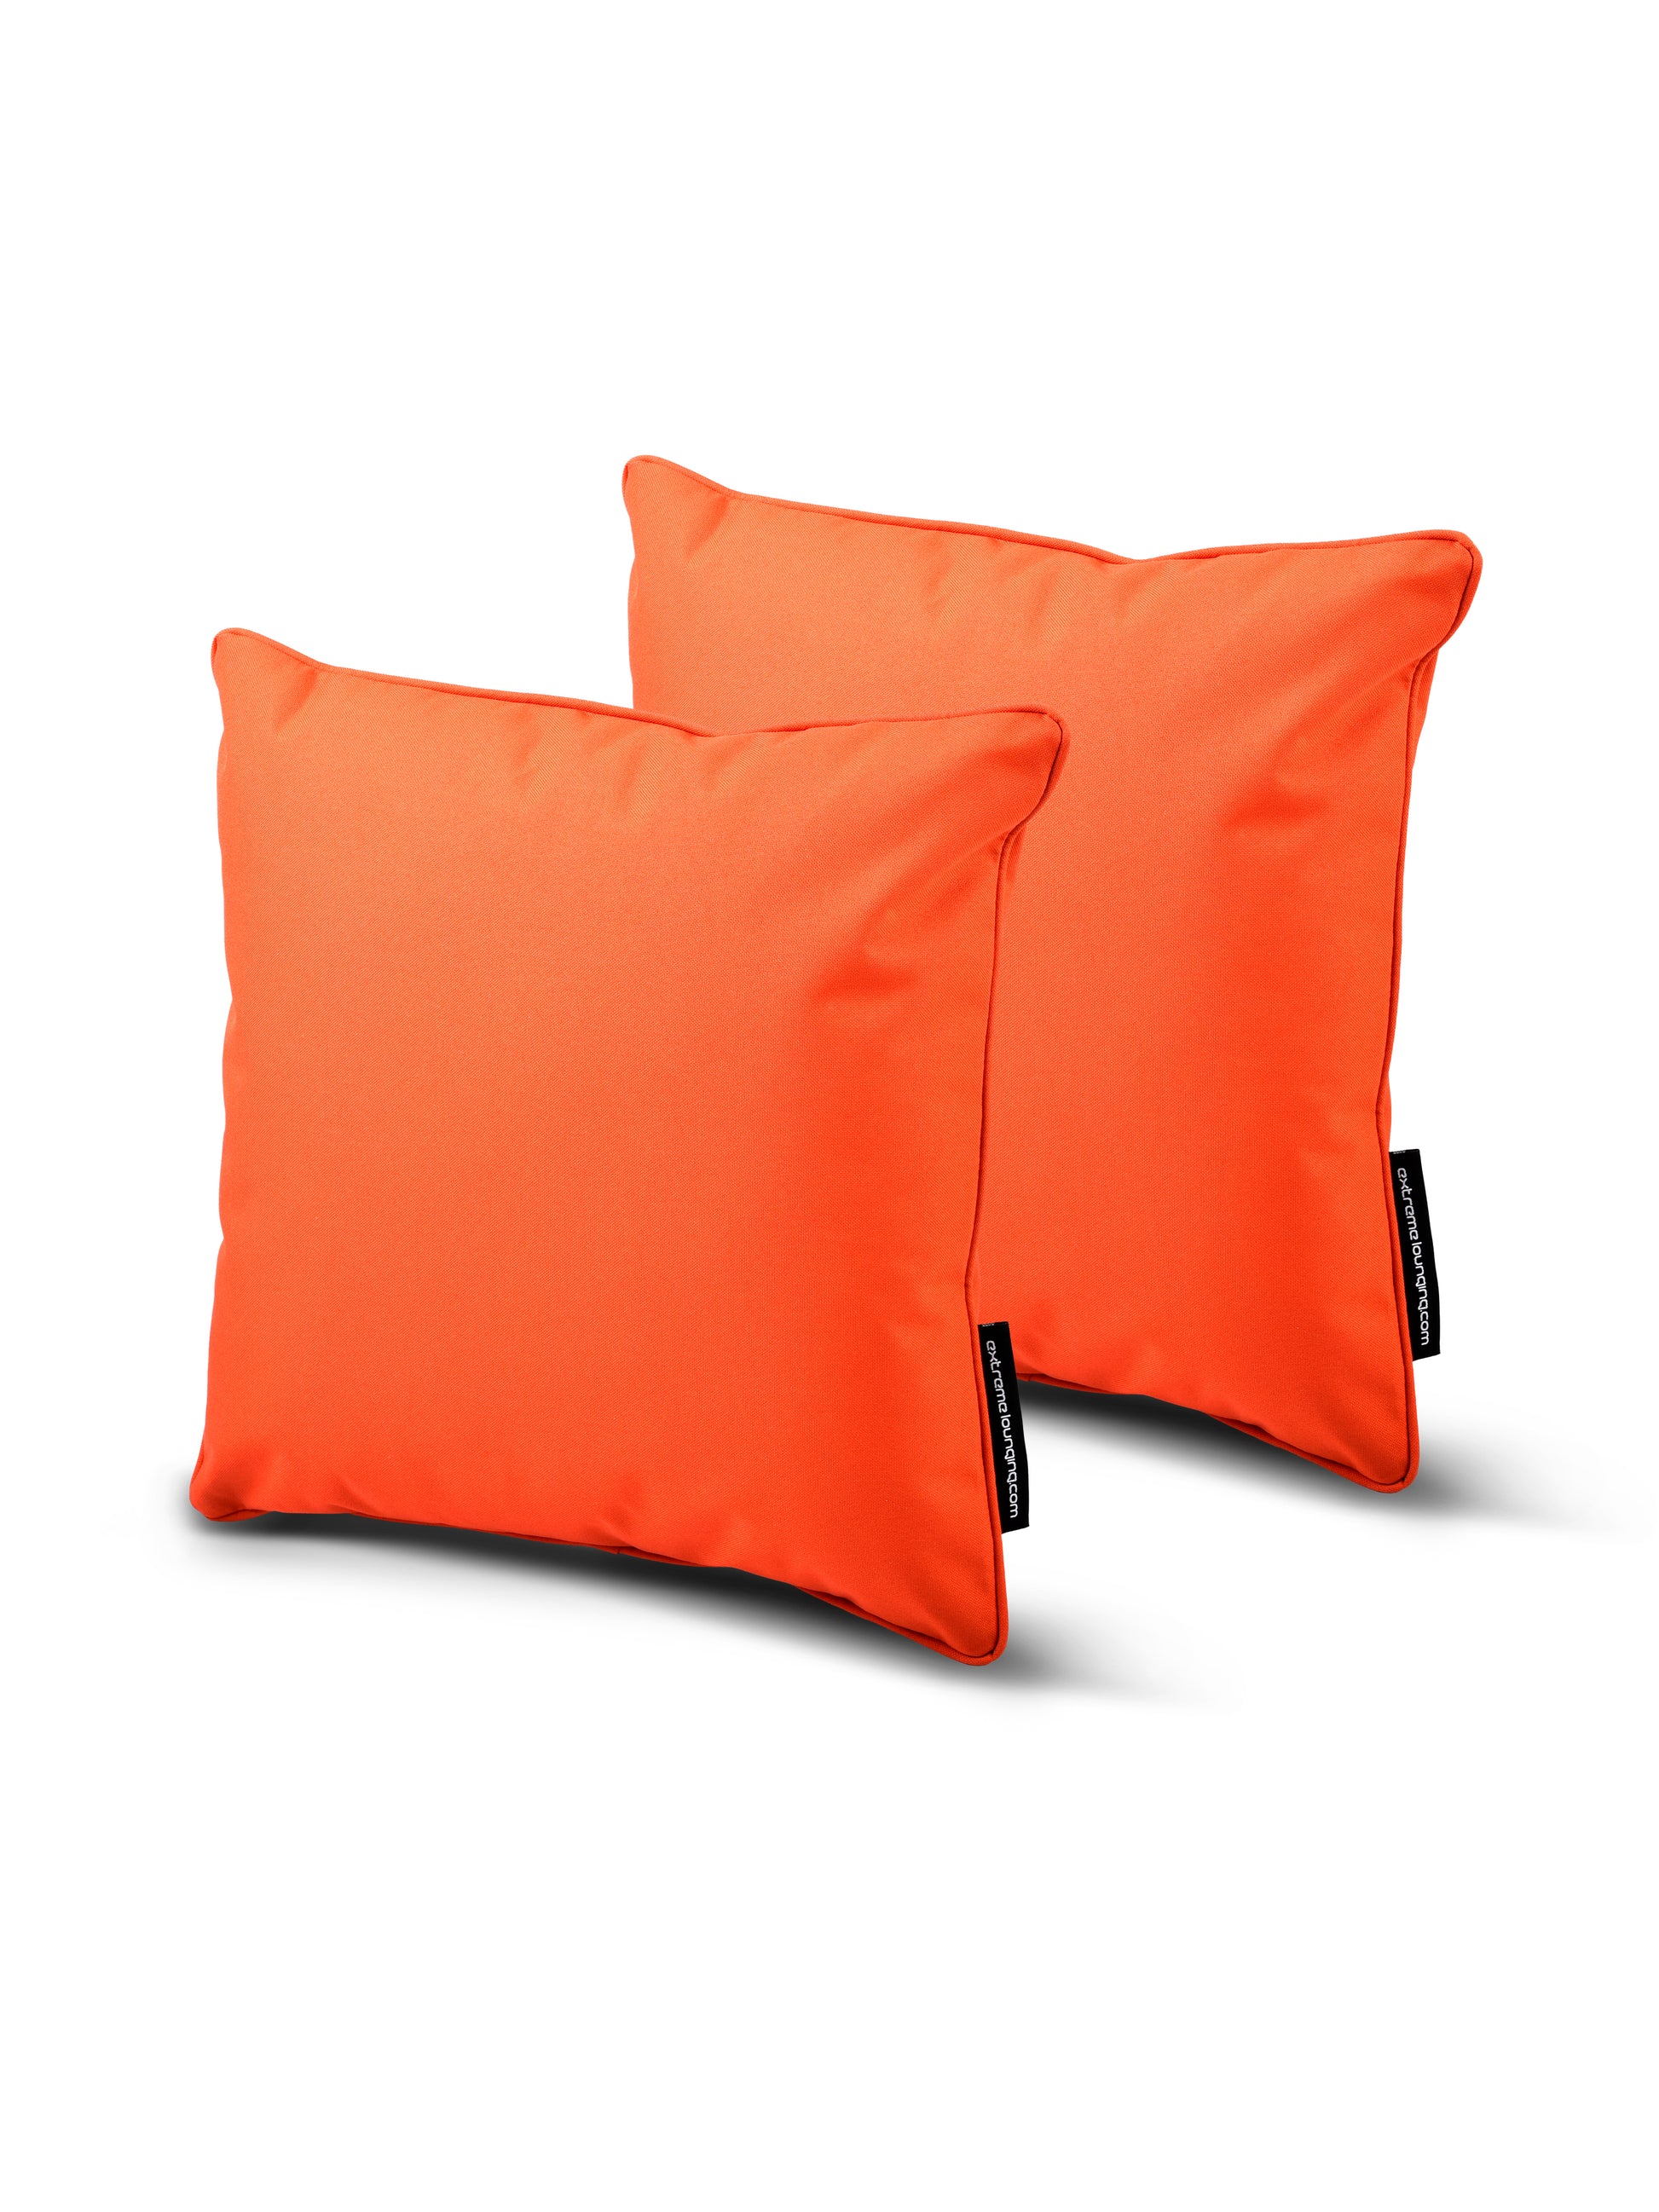 Two bright orange B Cushion Twin Pack Brights Collection pillows by Brisks, made of breathable polyester, are positioned with one slightly in front of the other against a plain white background. Each pillow has a small black tag on the side edge. The fabric appears smooth and the colors are vibrant.